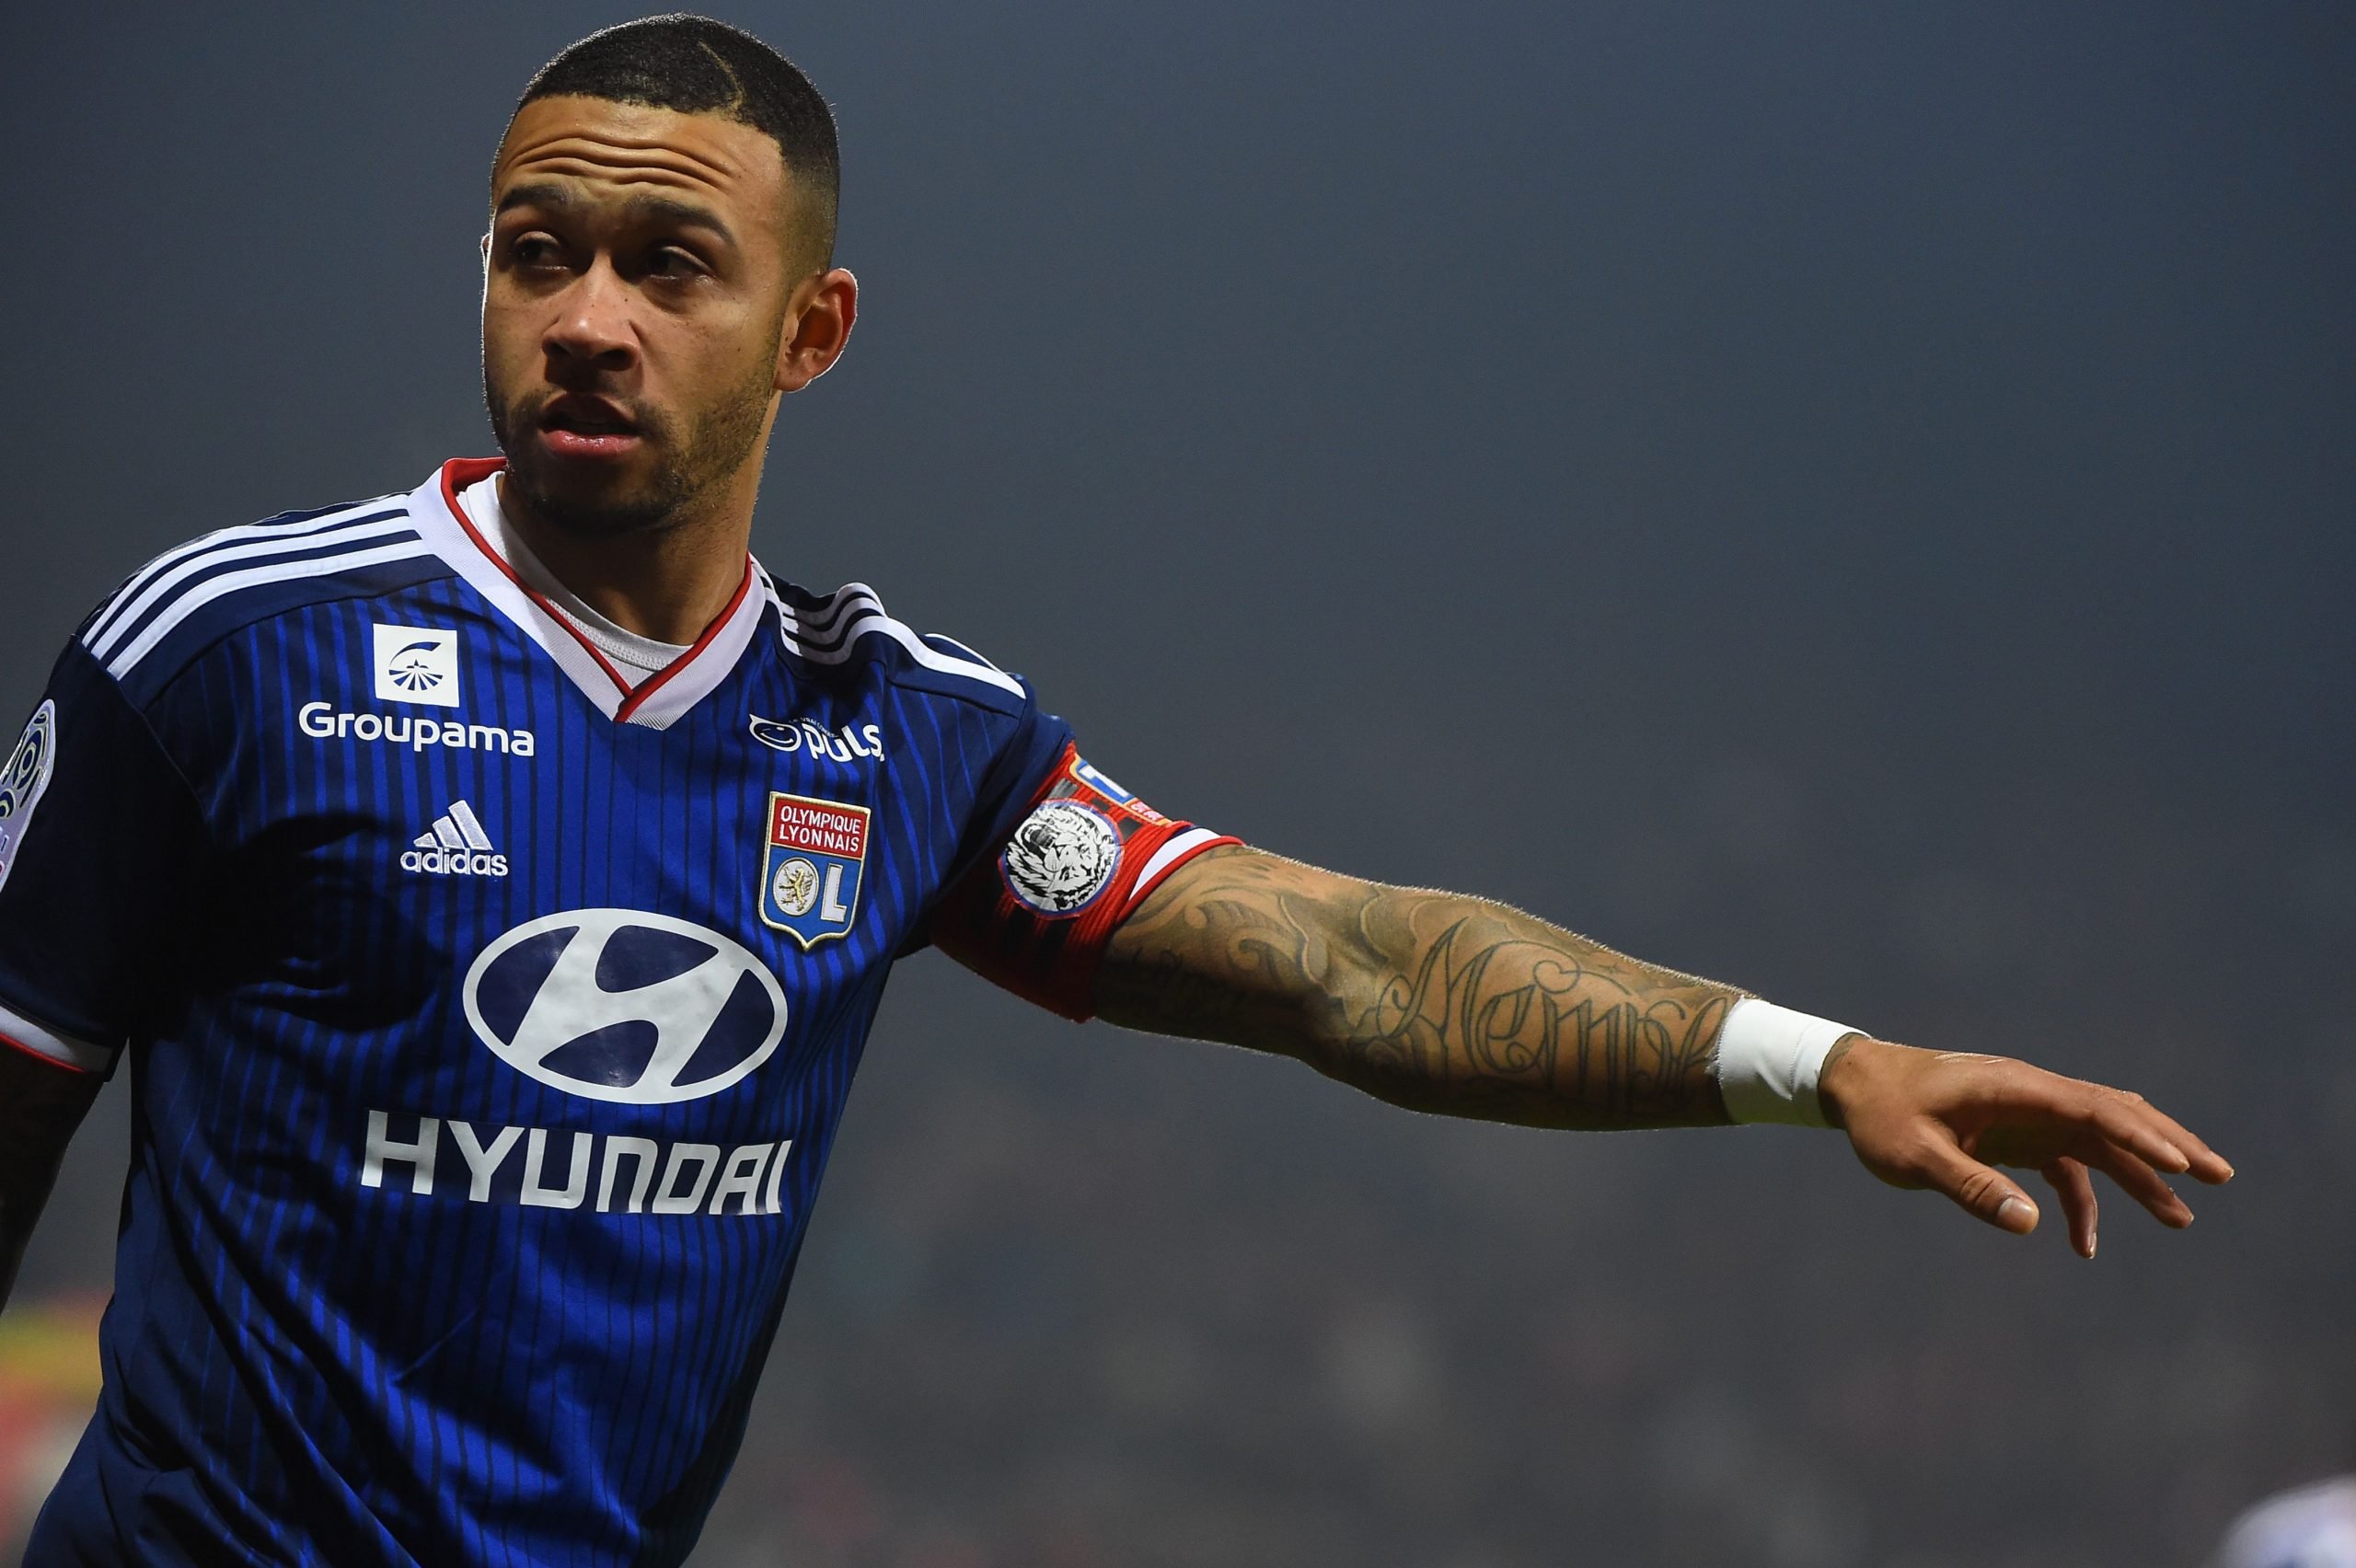 Liverpool will attempt to beat Barcelona for Memphis Depay who is seen in the photo